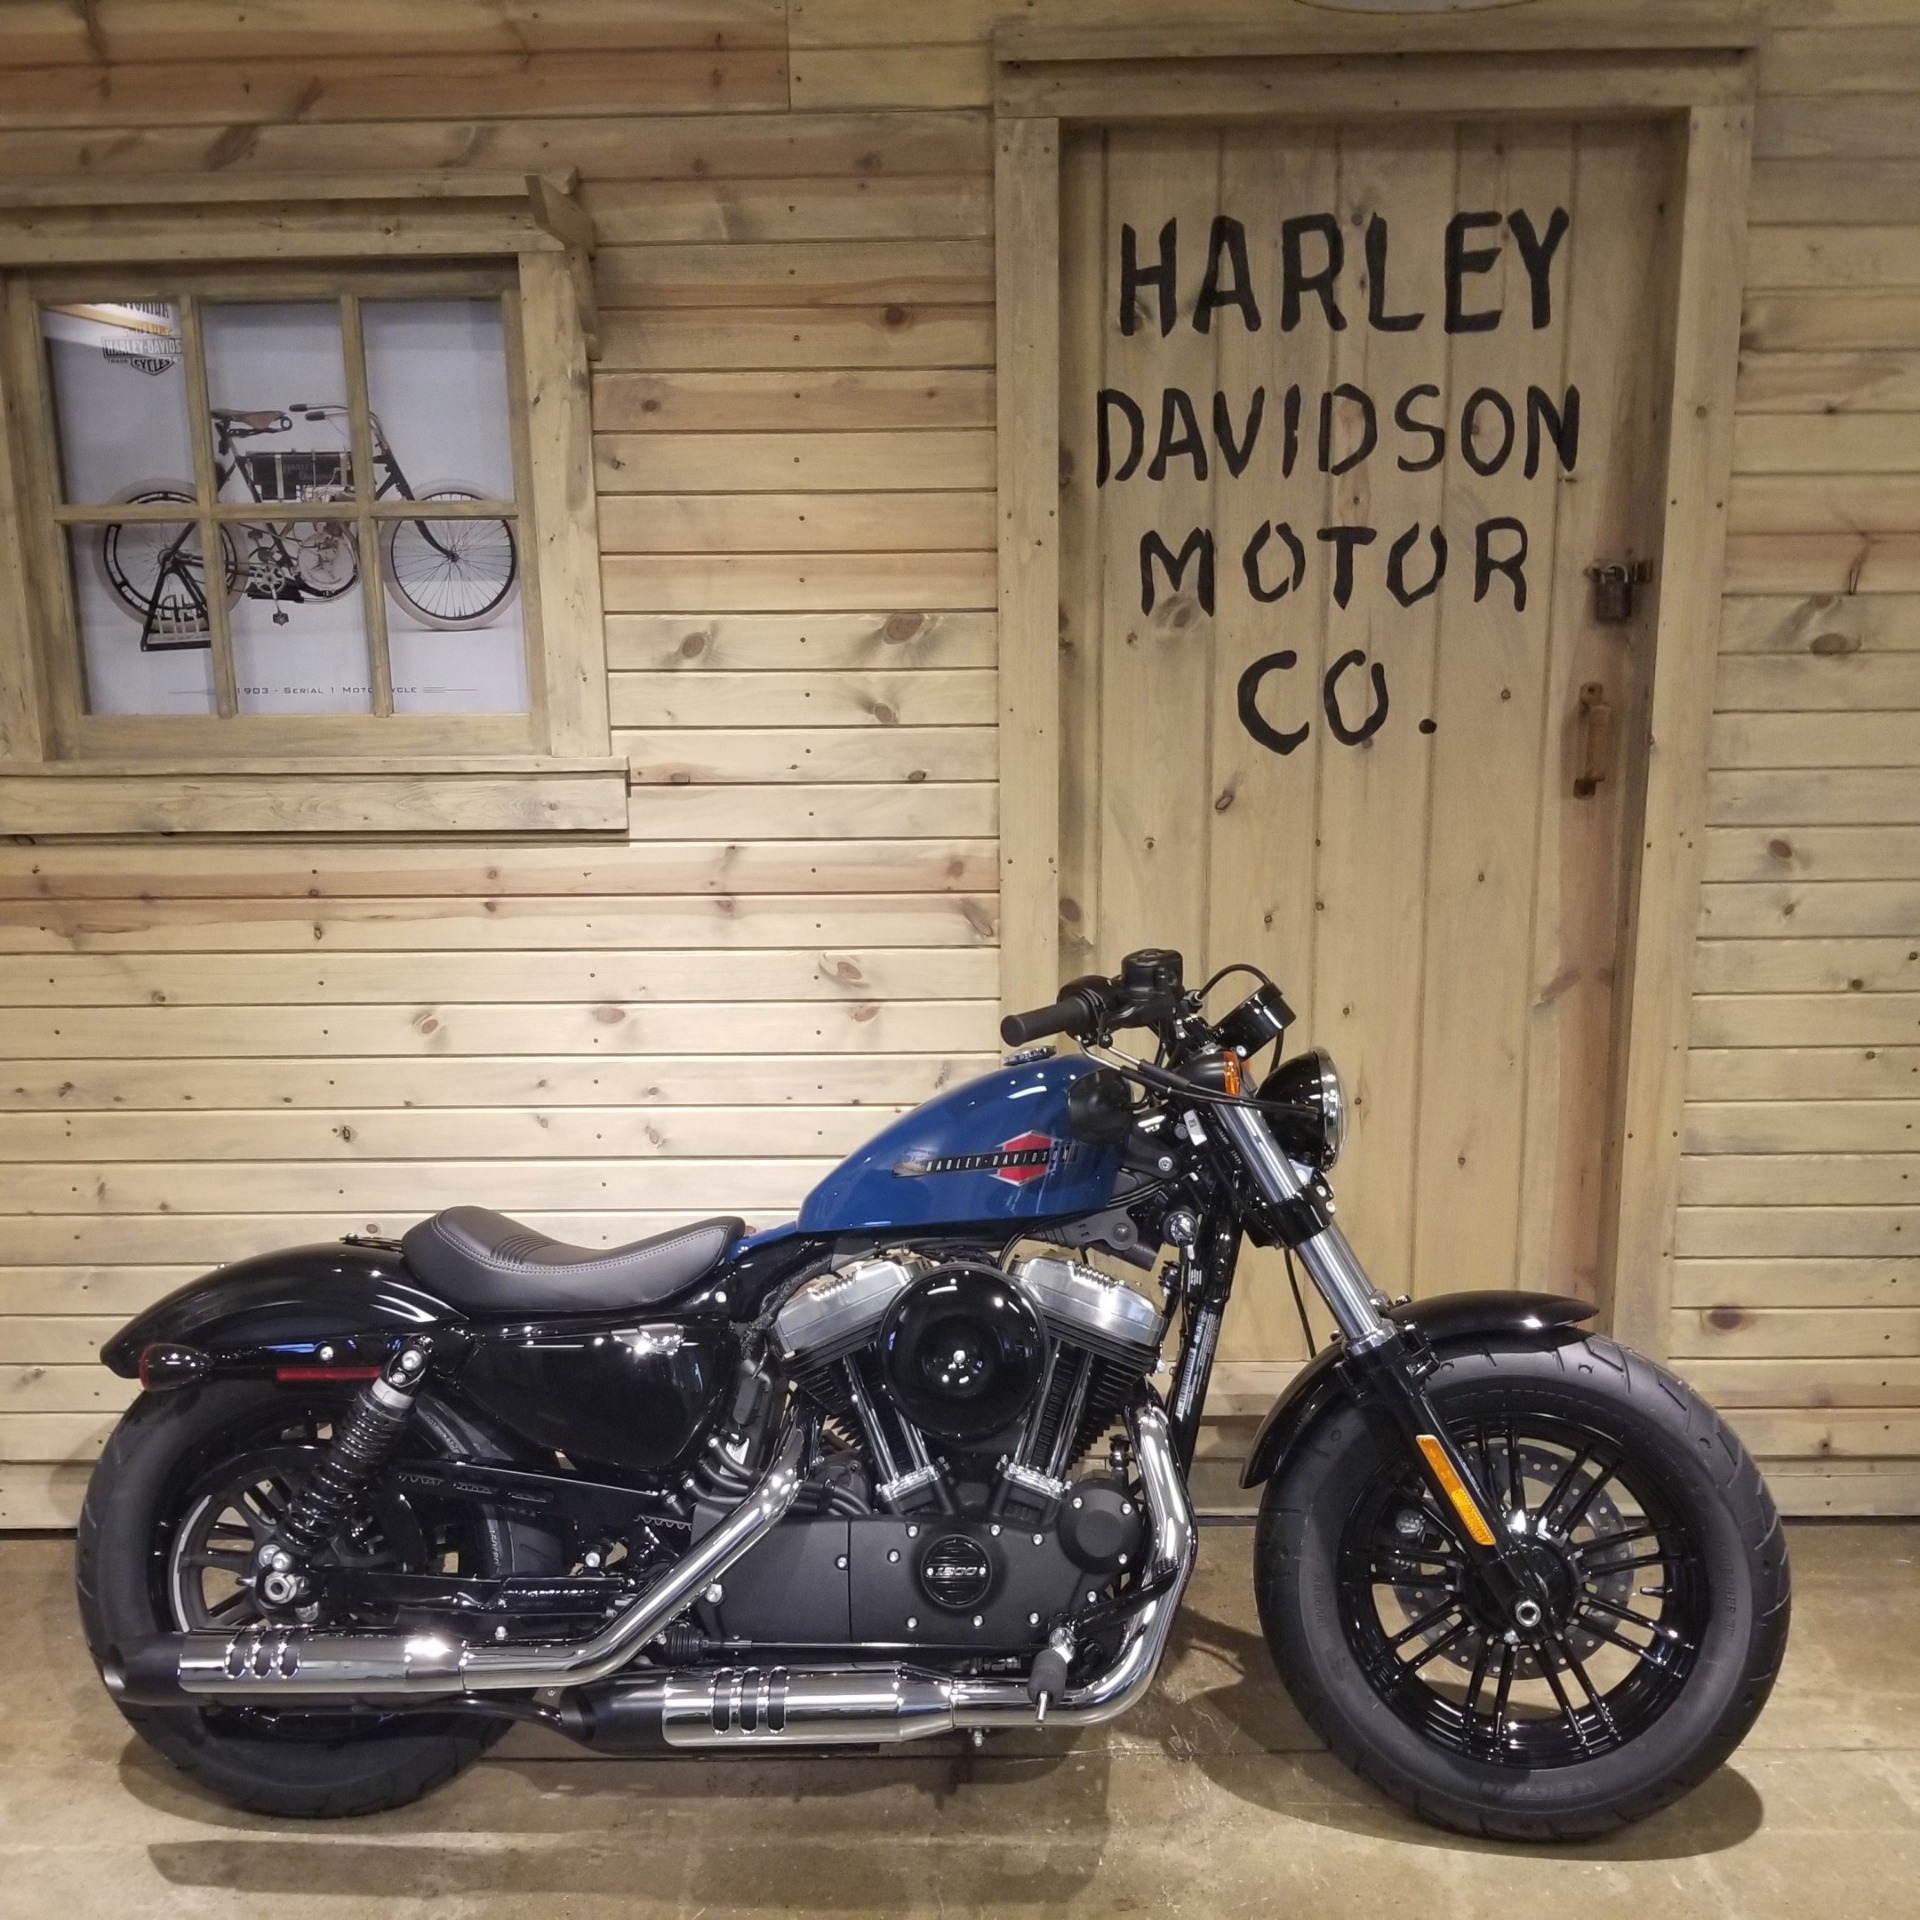 New 2021 Harley Davidson Forty Eight Motorcycles In Mentor Oh Stock Number 160002